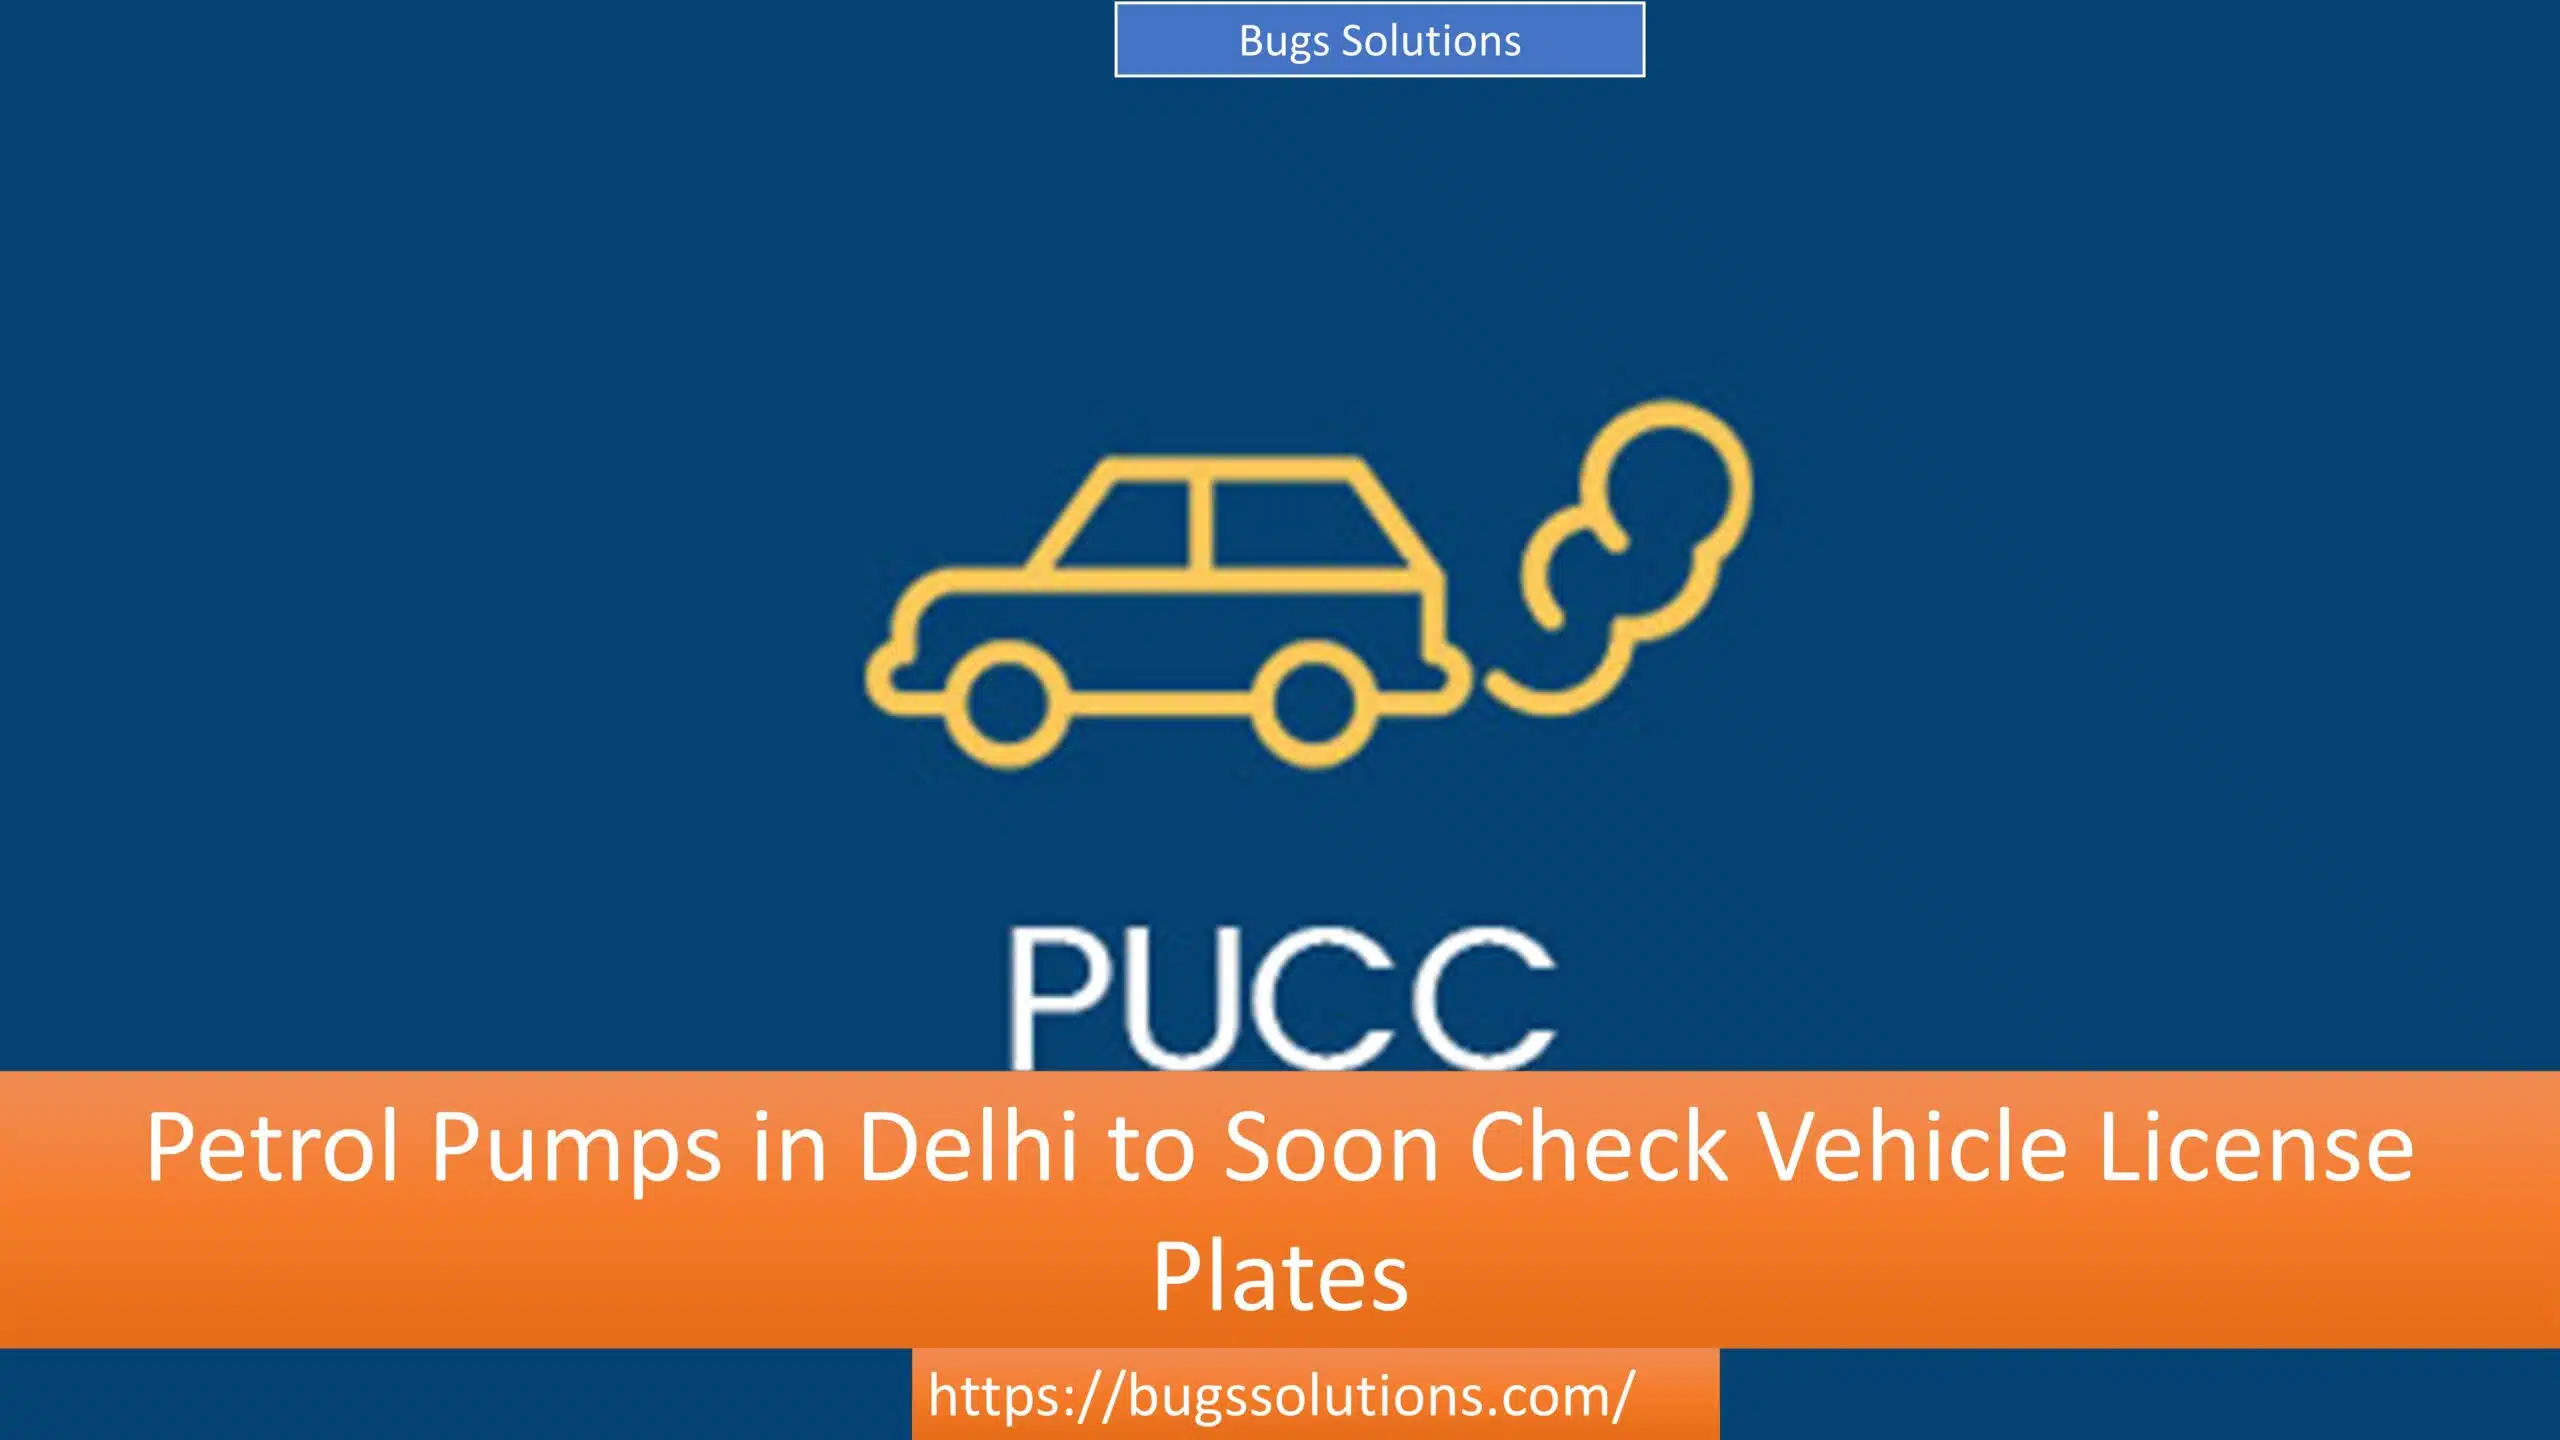 Petrol Pumps in Delhi to Soon Check Vehicle License Plates